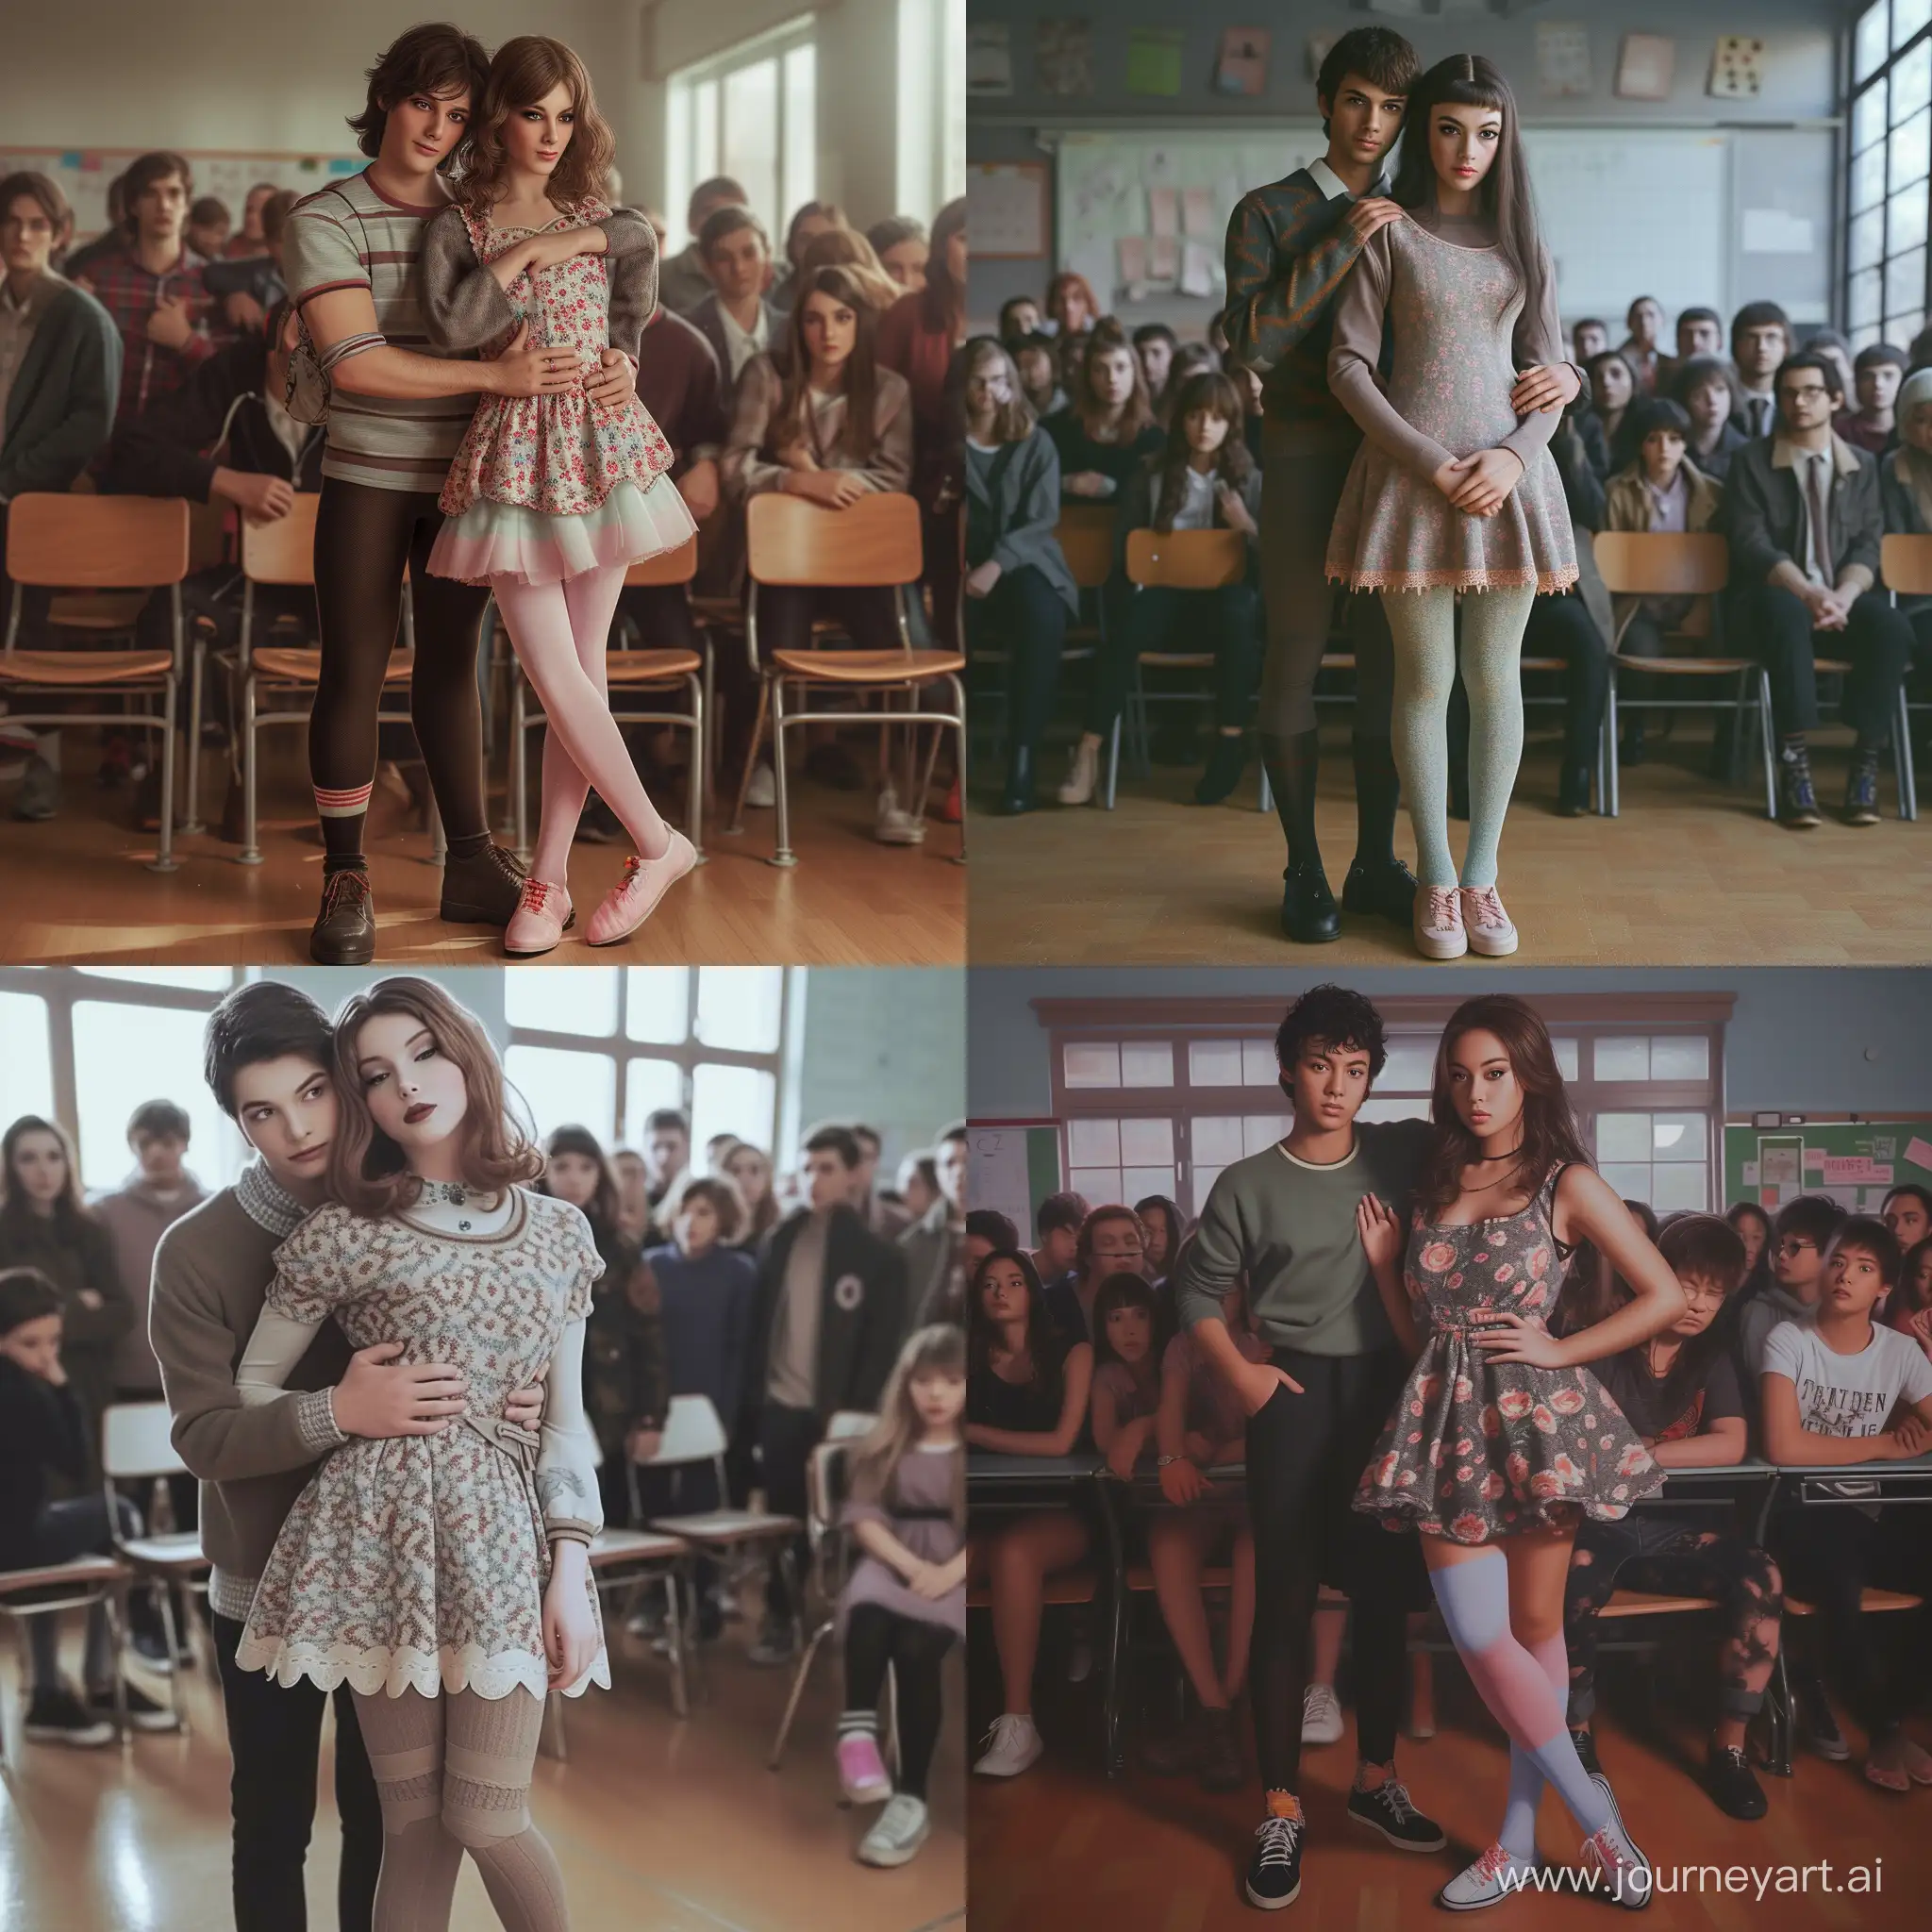 photorealistic, transgender girl ,in school, outfit contains cozy dress and tights,looks girly,  little makeup, looks shy, with cool boyfriend that puts arm on her waist, in full growth,in classroom, a lot of people behind, everyone looks on a couple, girly shoes, looks pretty and clean, transgender, photo, real